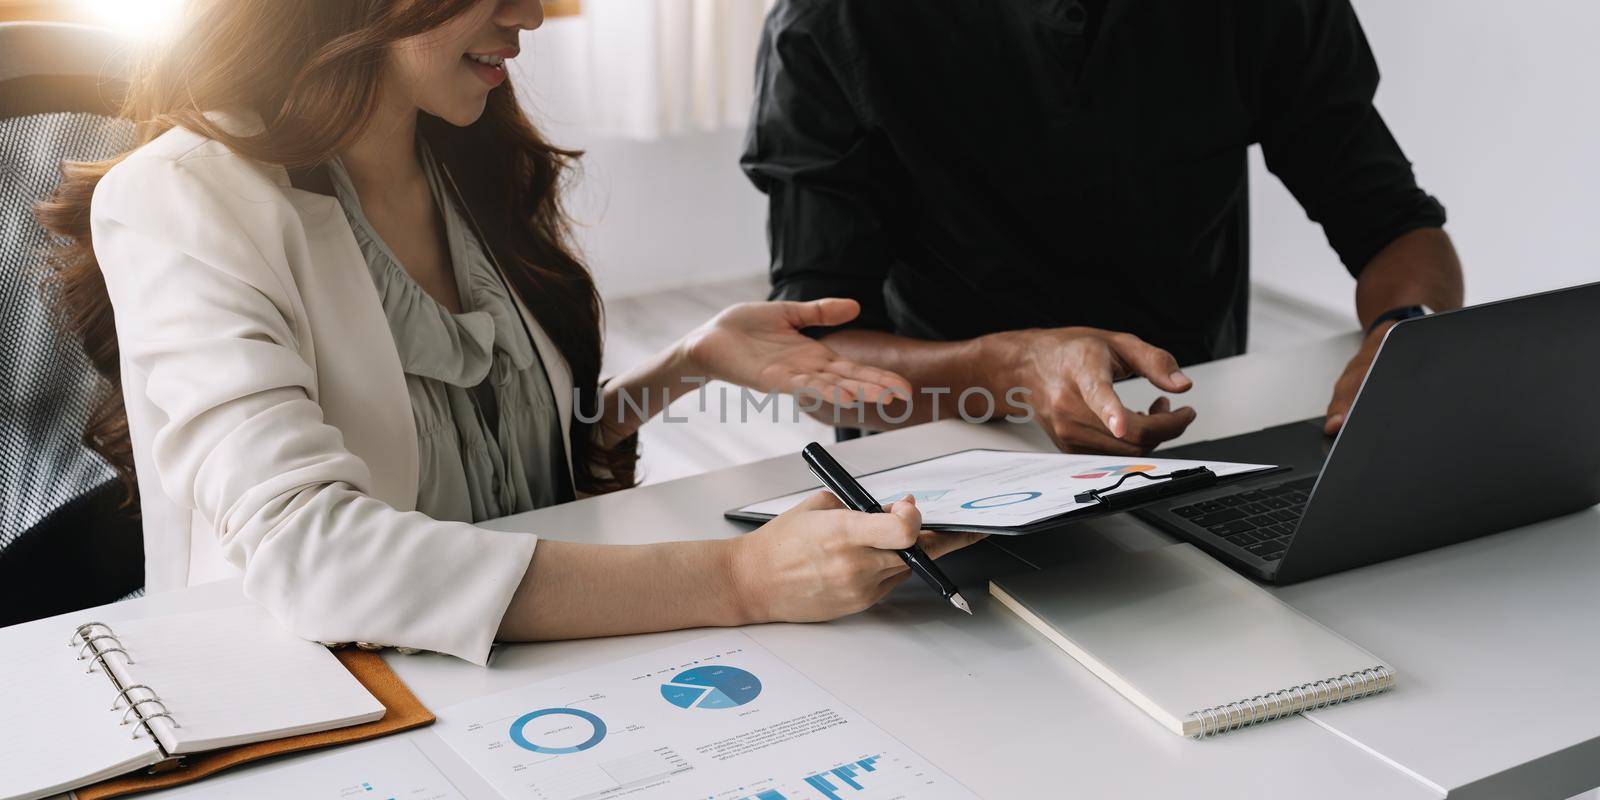 Business team finance or bookkeeper working with a calculator to calculate business data summary report, accountancy document and laptop computer at the office, business meeting concept.